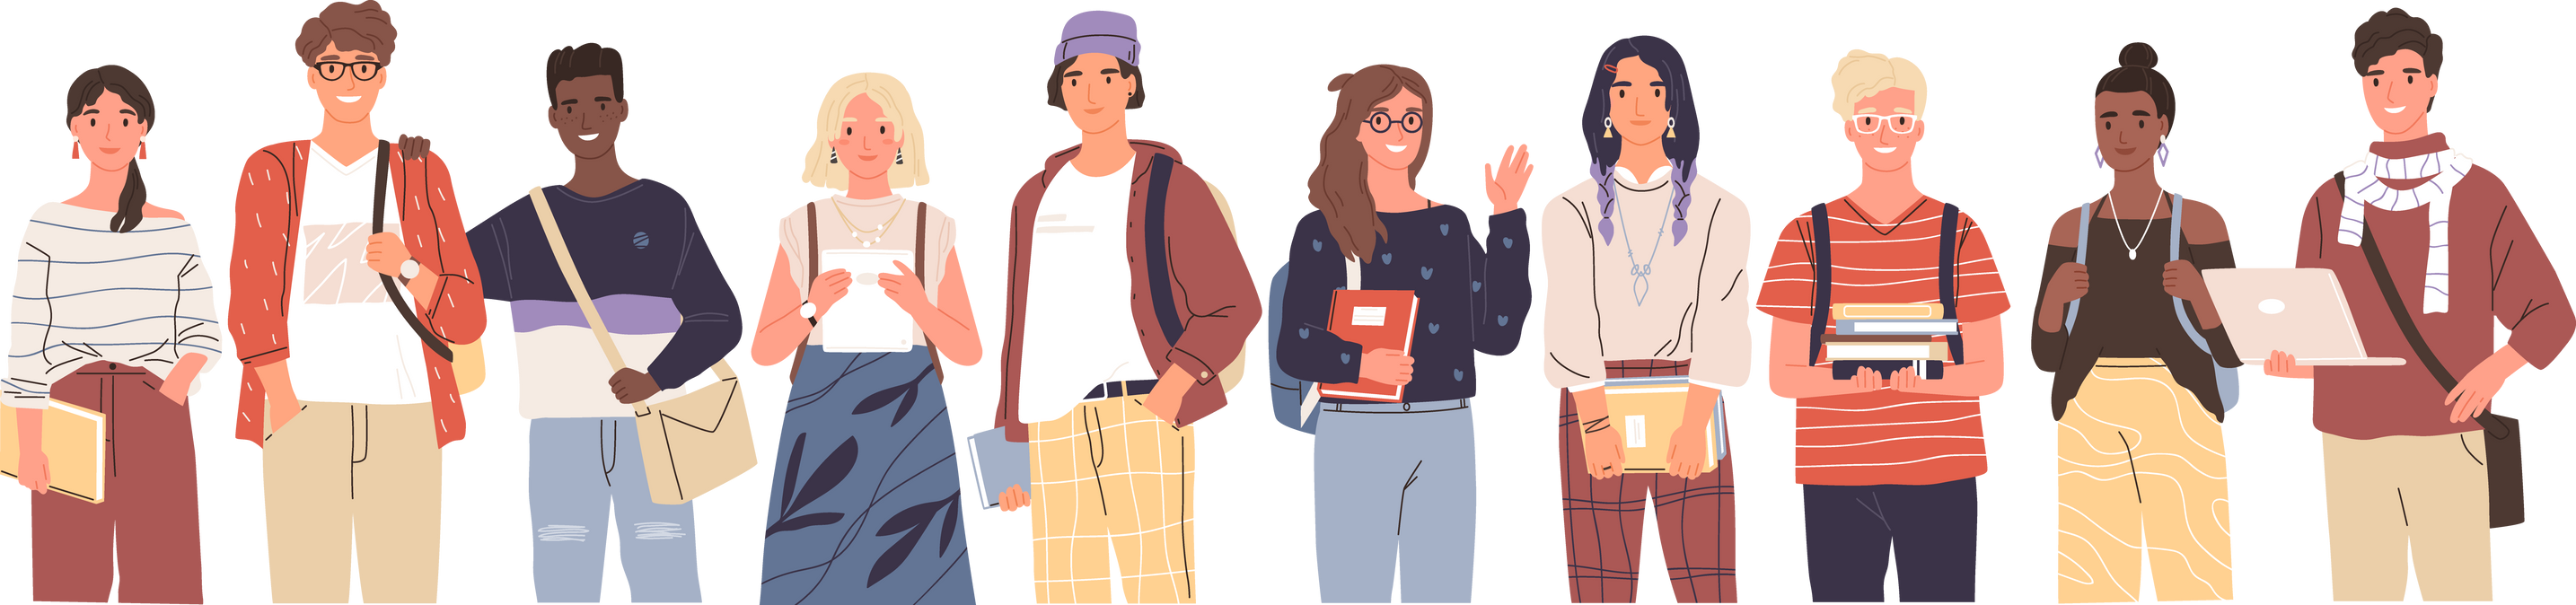 Group of Multicultural Students Illustration